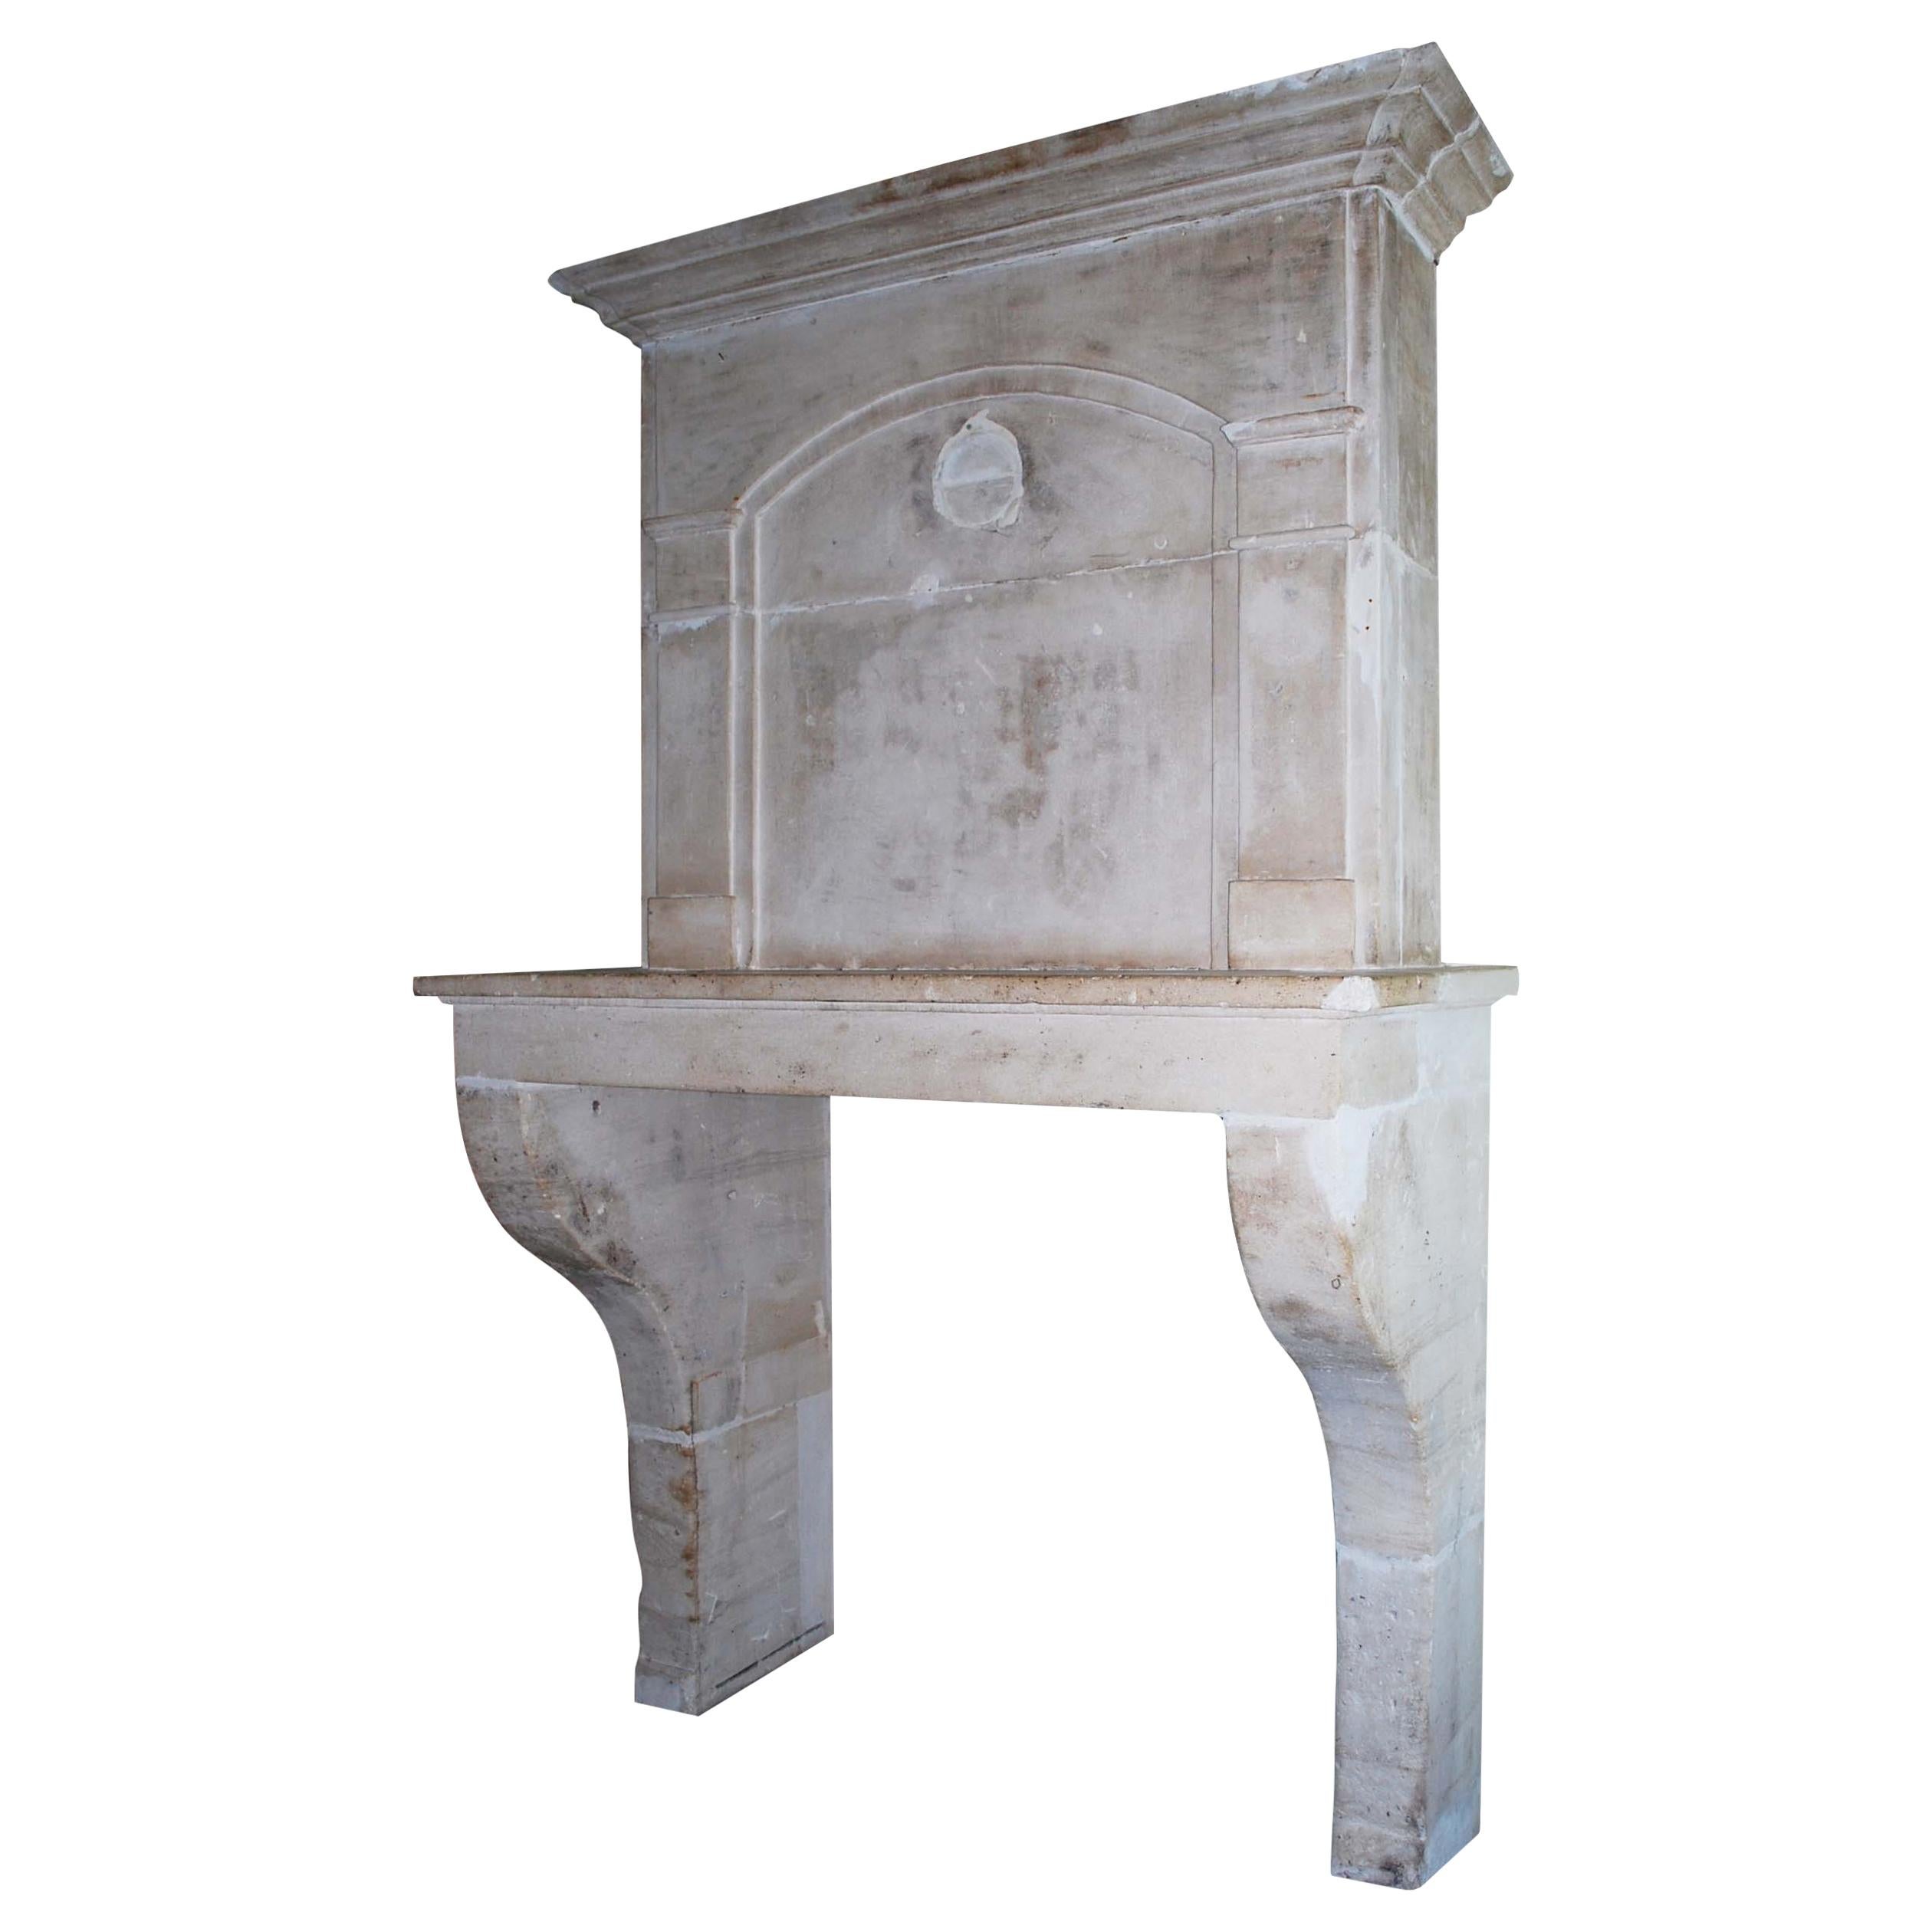 Antique French Limestone Fireplace or Mantelpiece with Overmantel or Trumeau